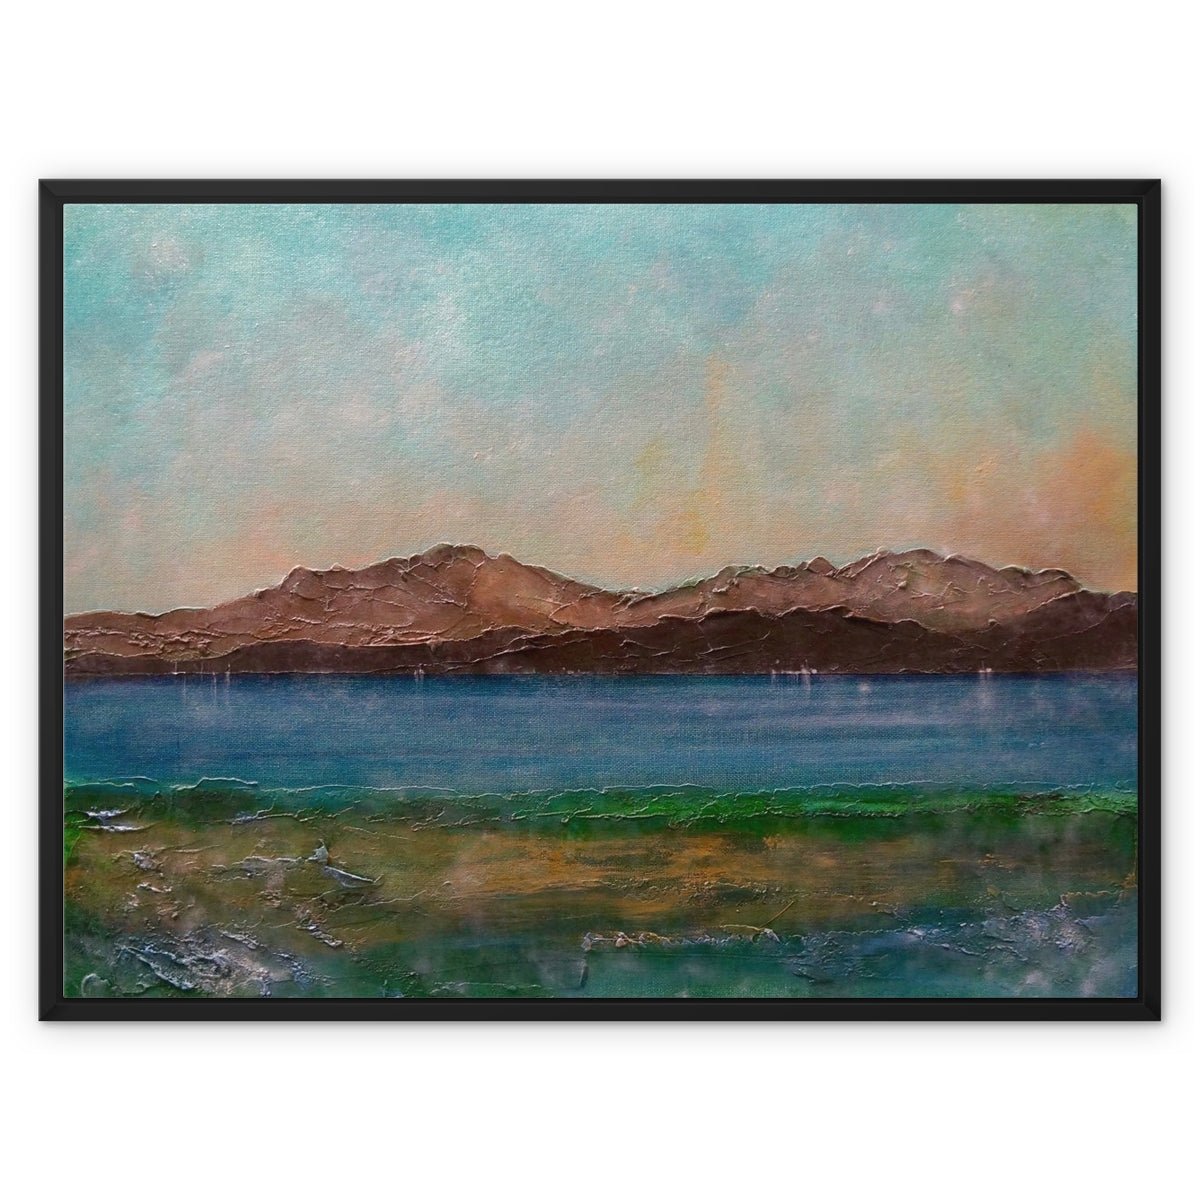 Arran From Scalpsie Bay Painting | Framed Canvas From Scotland-Floating Framed Canvas Prints-Arran Art Gallery-32"x24"-Black Frame-Paintings, Prints, Homeware, Art Gifts From Scotland By Scottish Artist Kevin Hunter